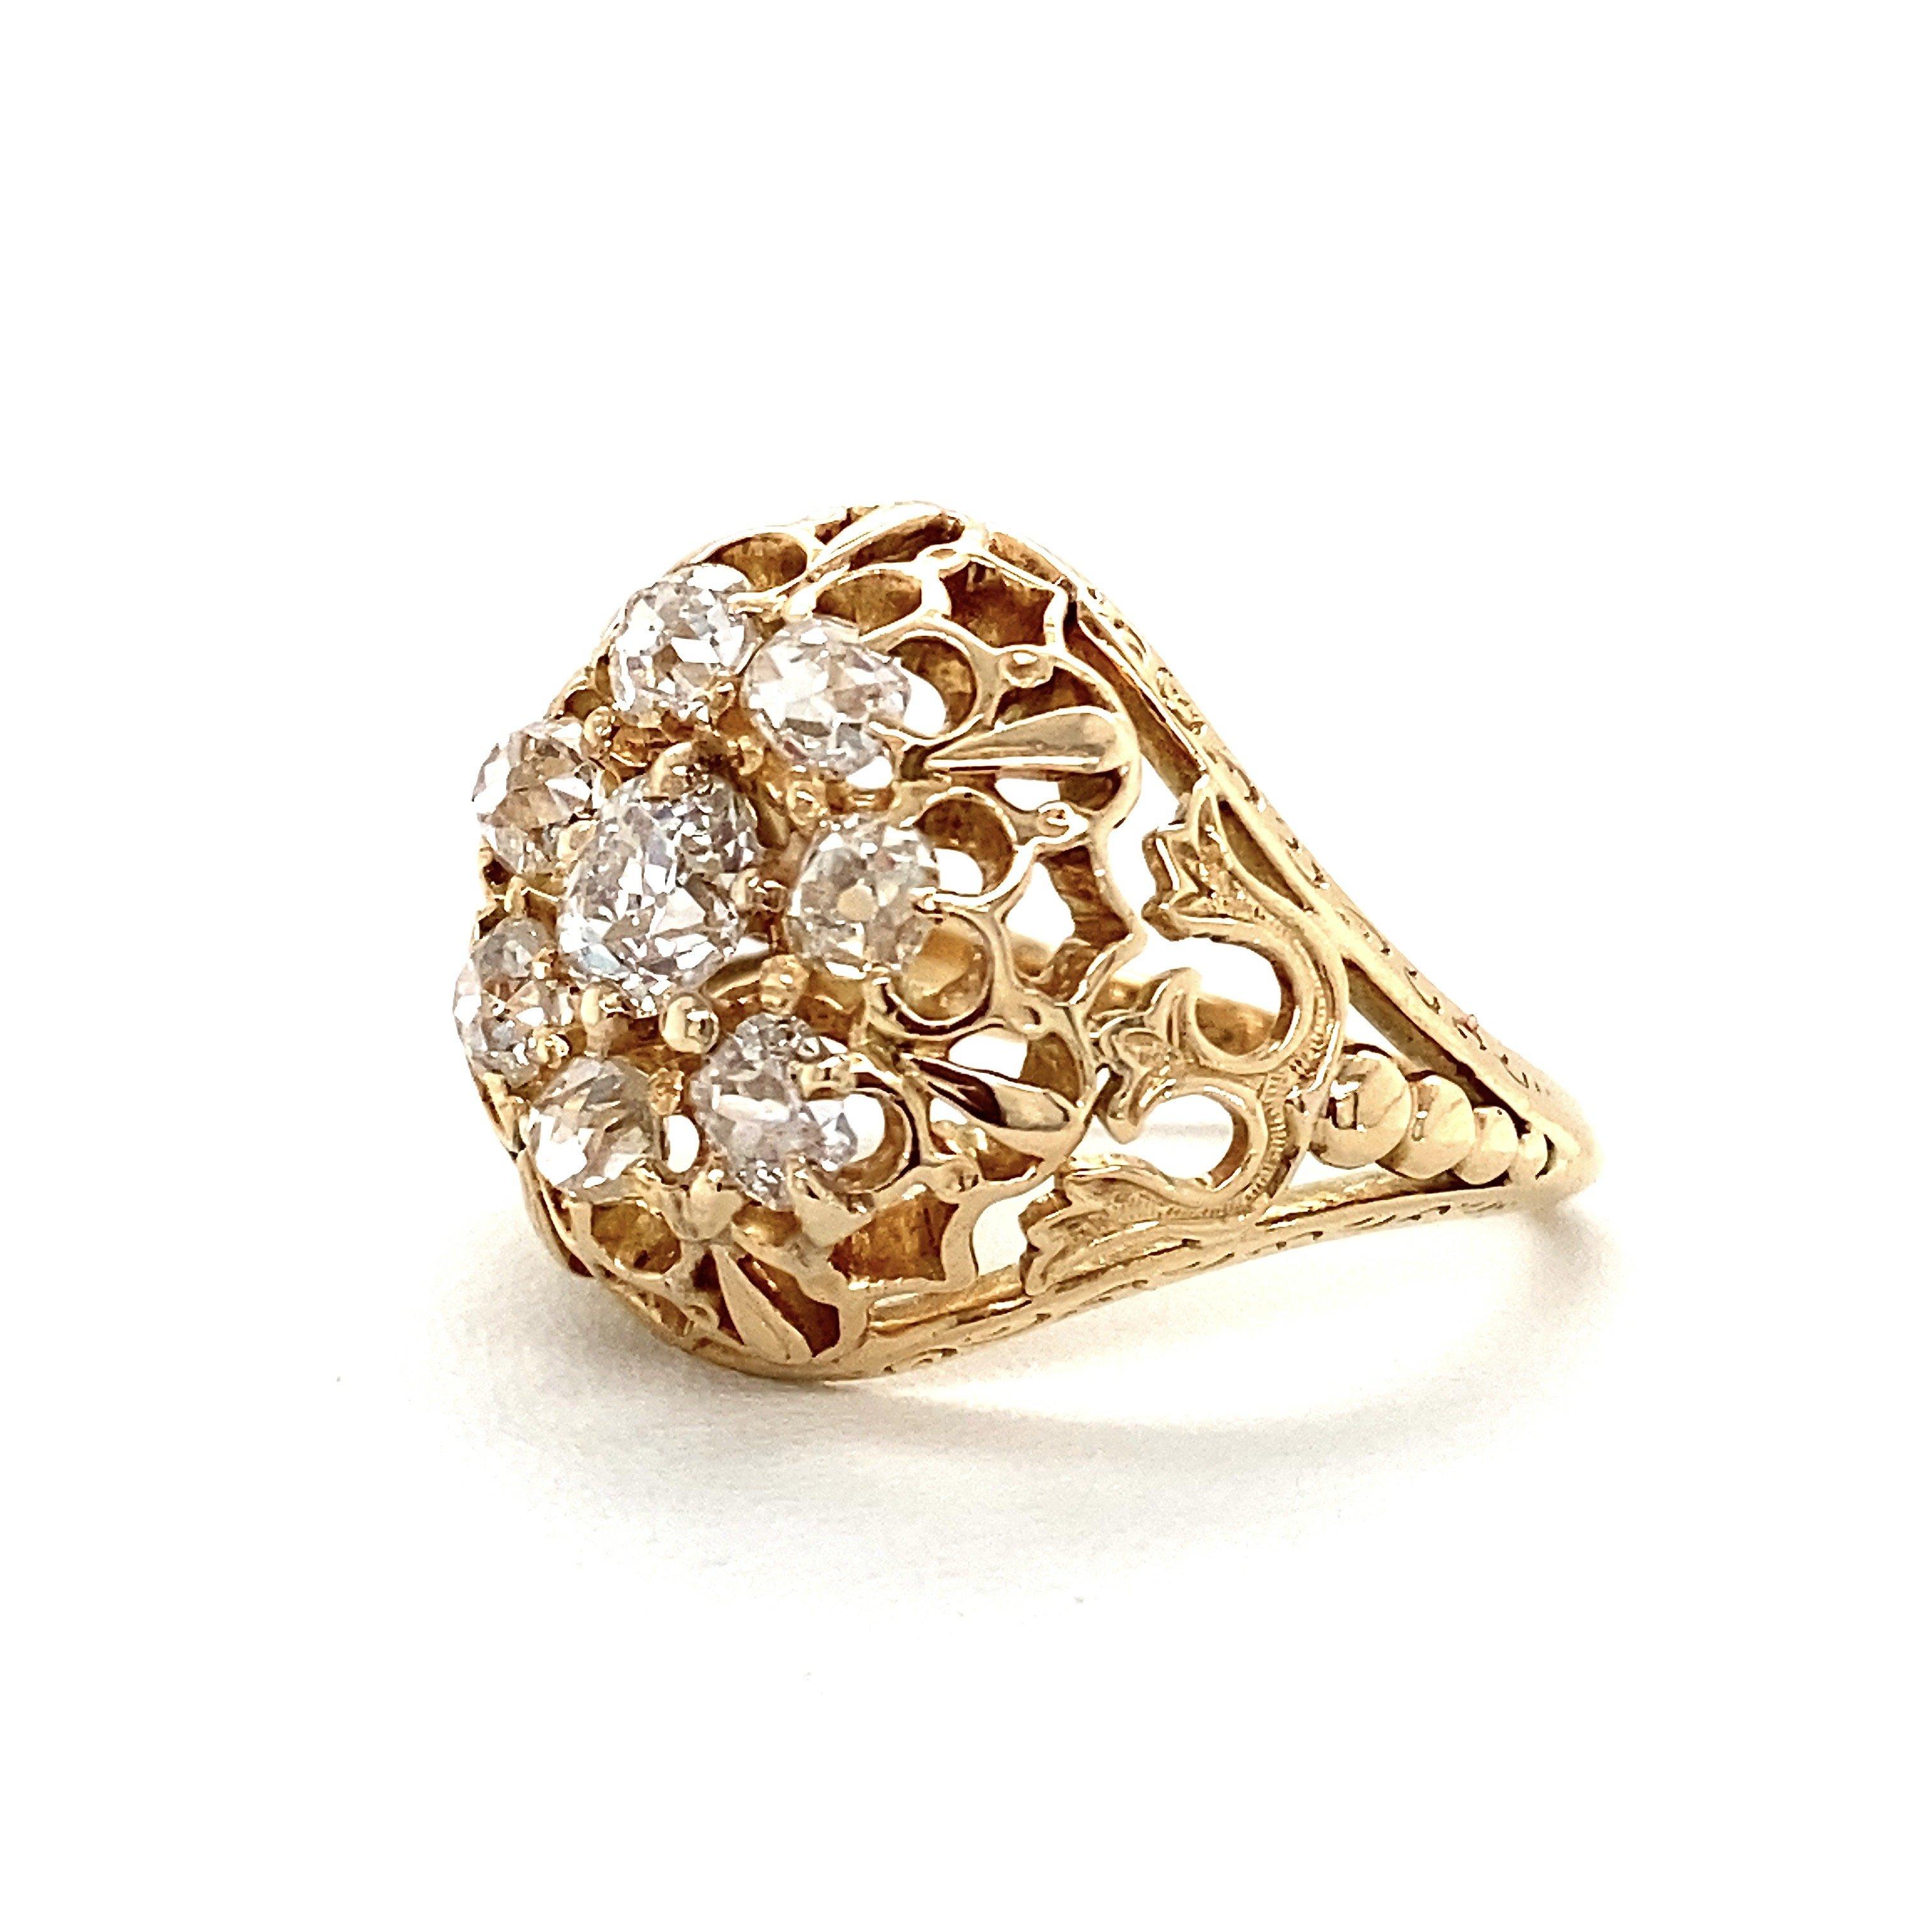 Antique 18KT Gold 1.5CT Diamond Domed Cluster Ring, Engraved 1861 2